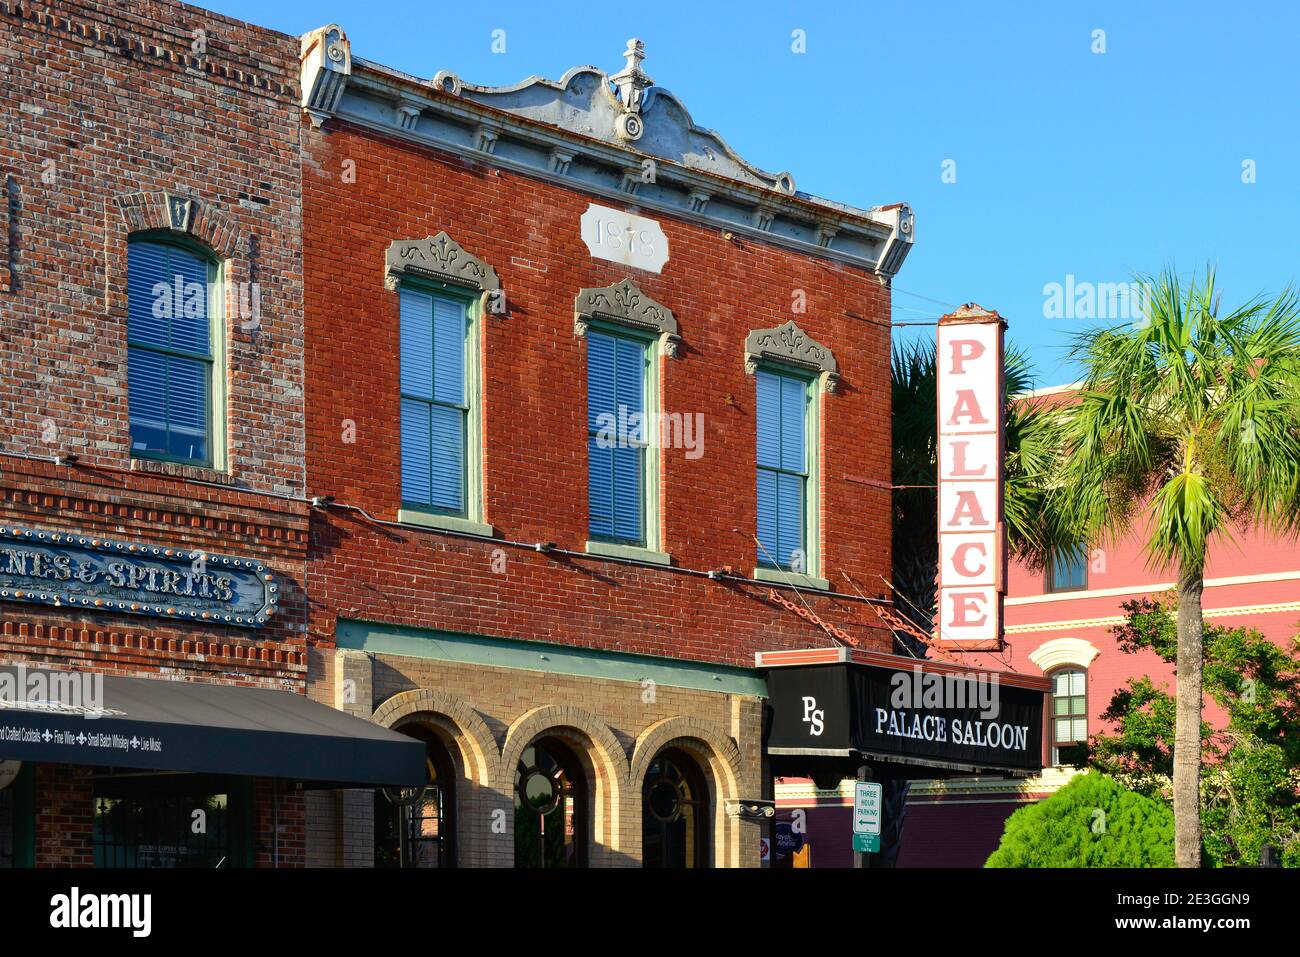 A view of historic old brick buildings from 1878, now revitilized as the popular bar, the Palace Saloon in Fernandina Beach, on Ameilia Island, FL Stock Photo